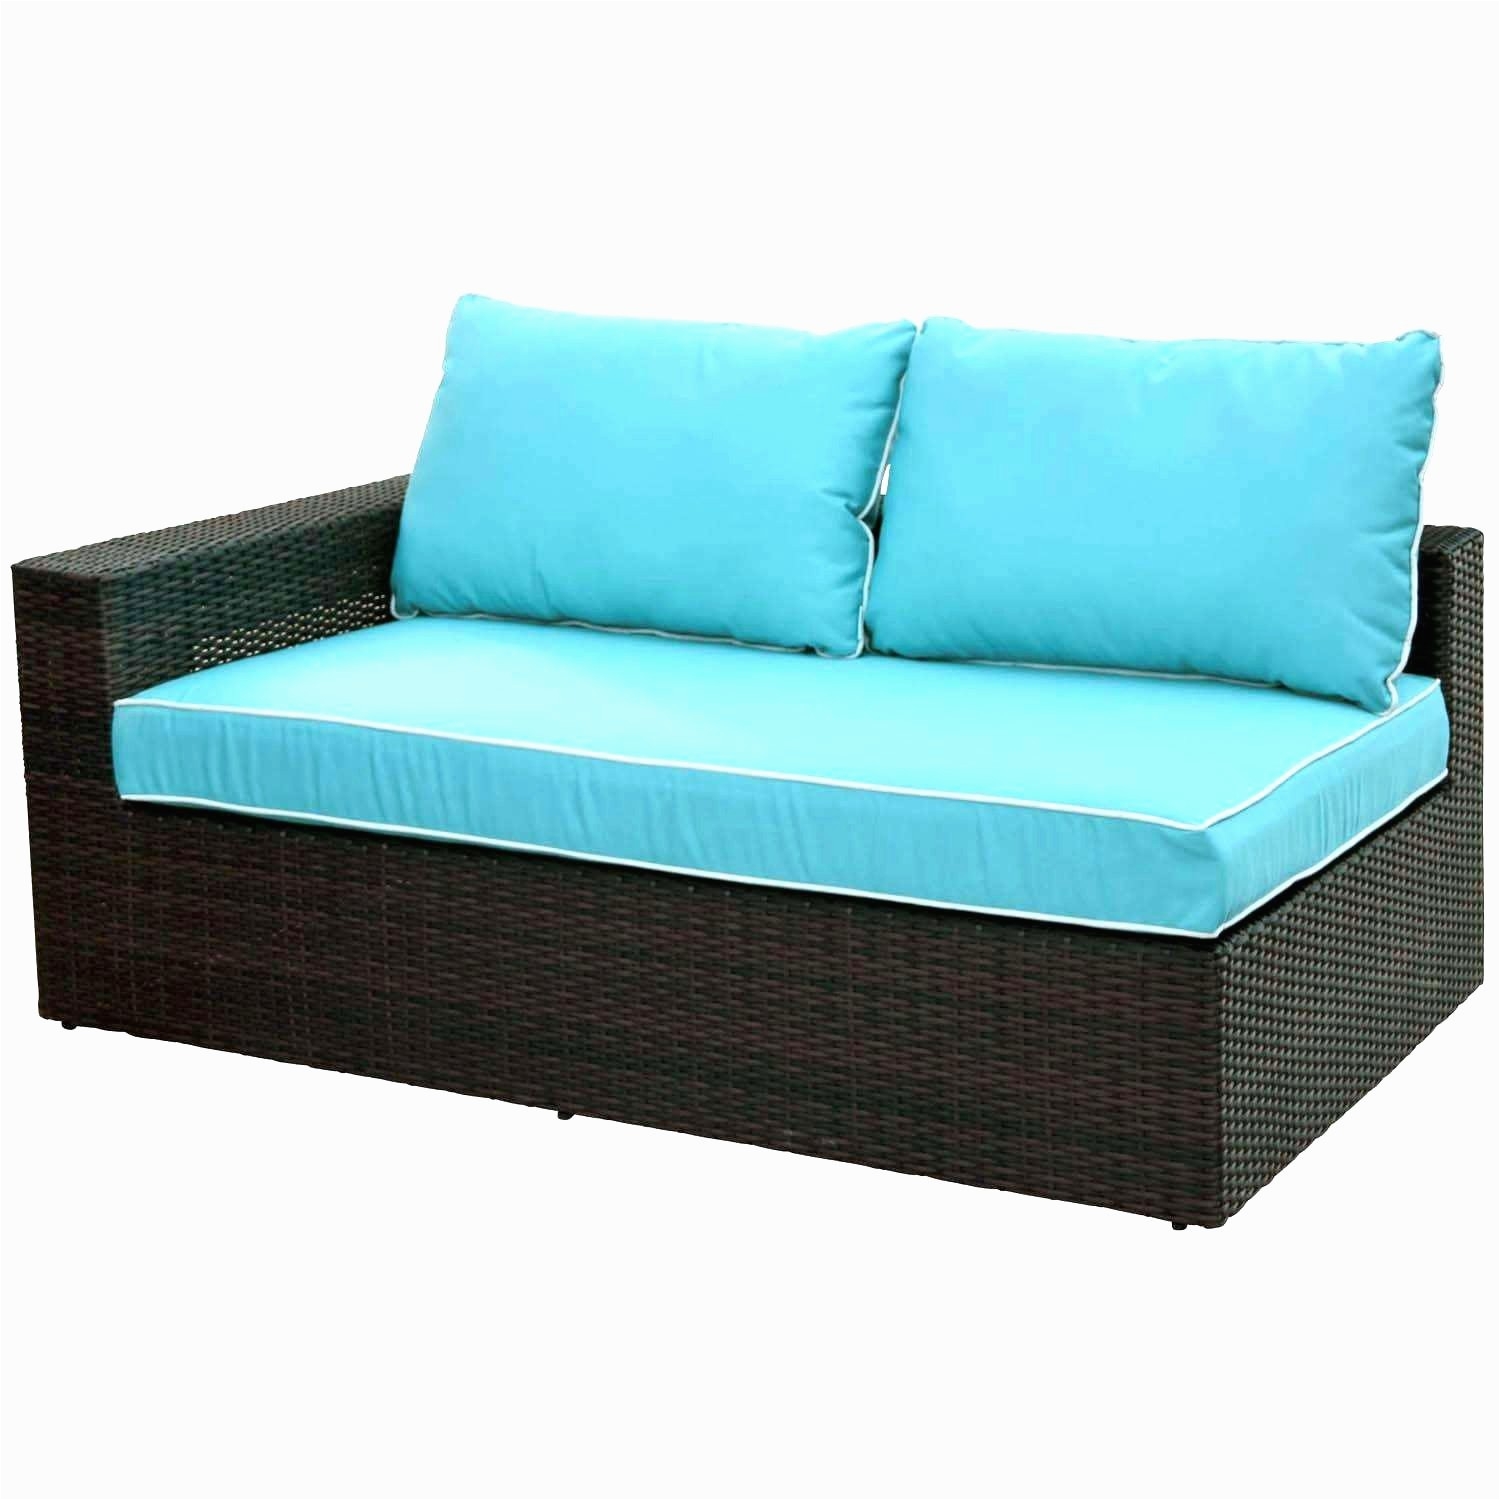 lovely outdoor furniture set bomelconsult from fred meyer patio furniture replacement cushions source unique fred meyer